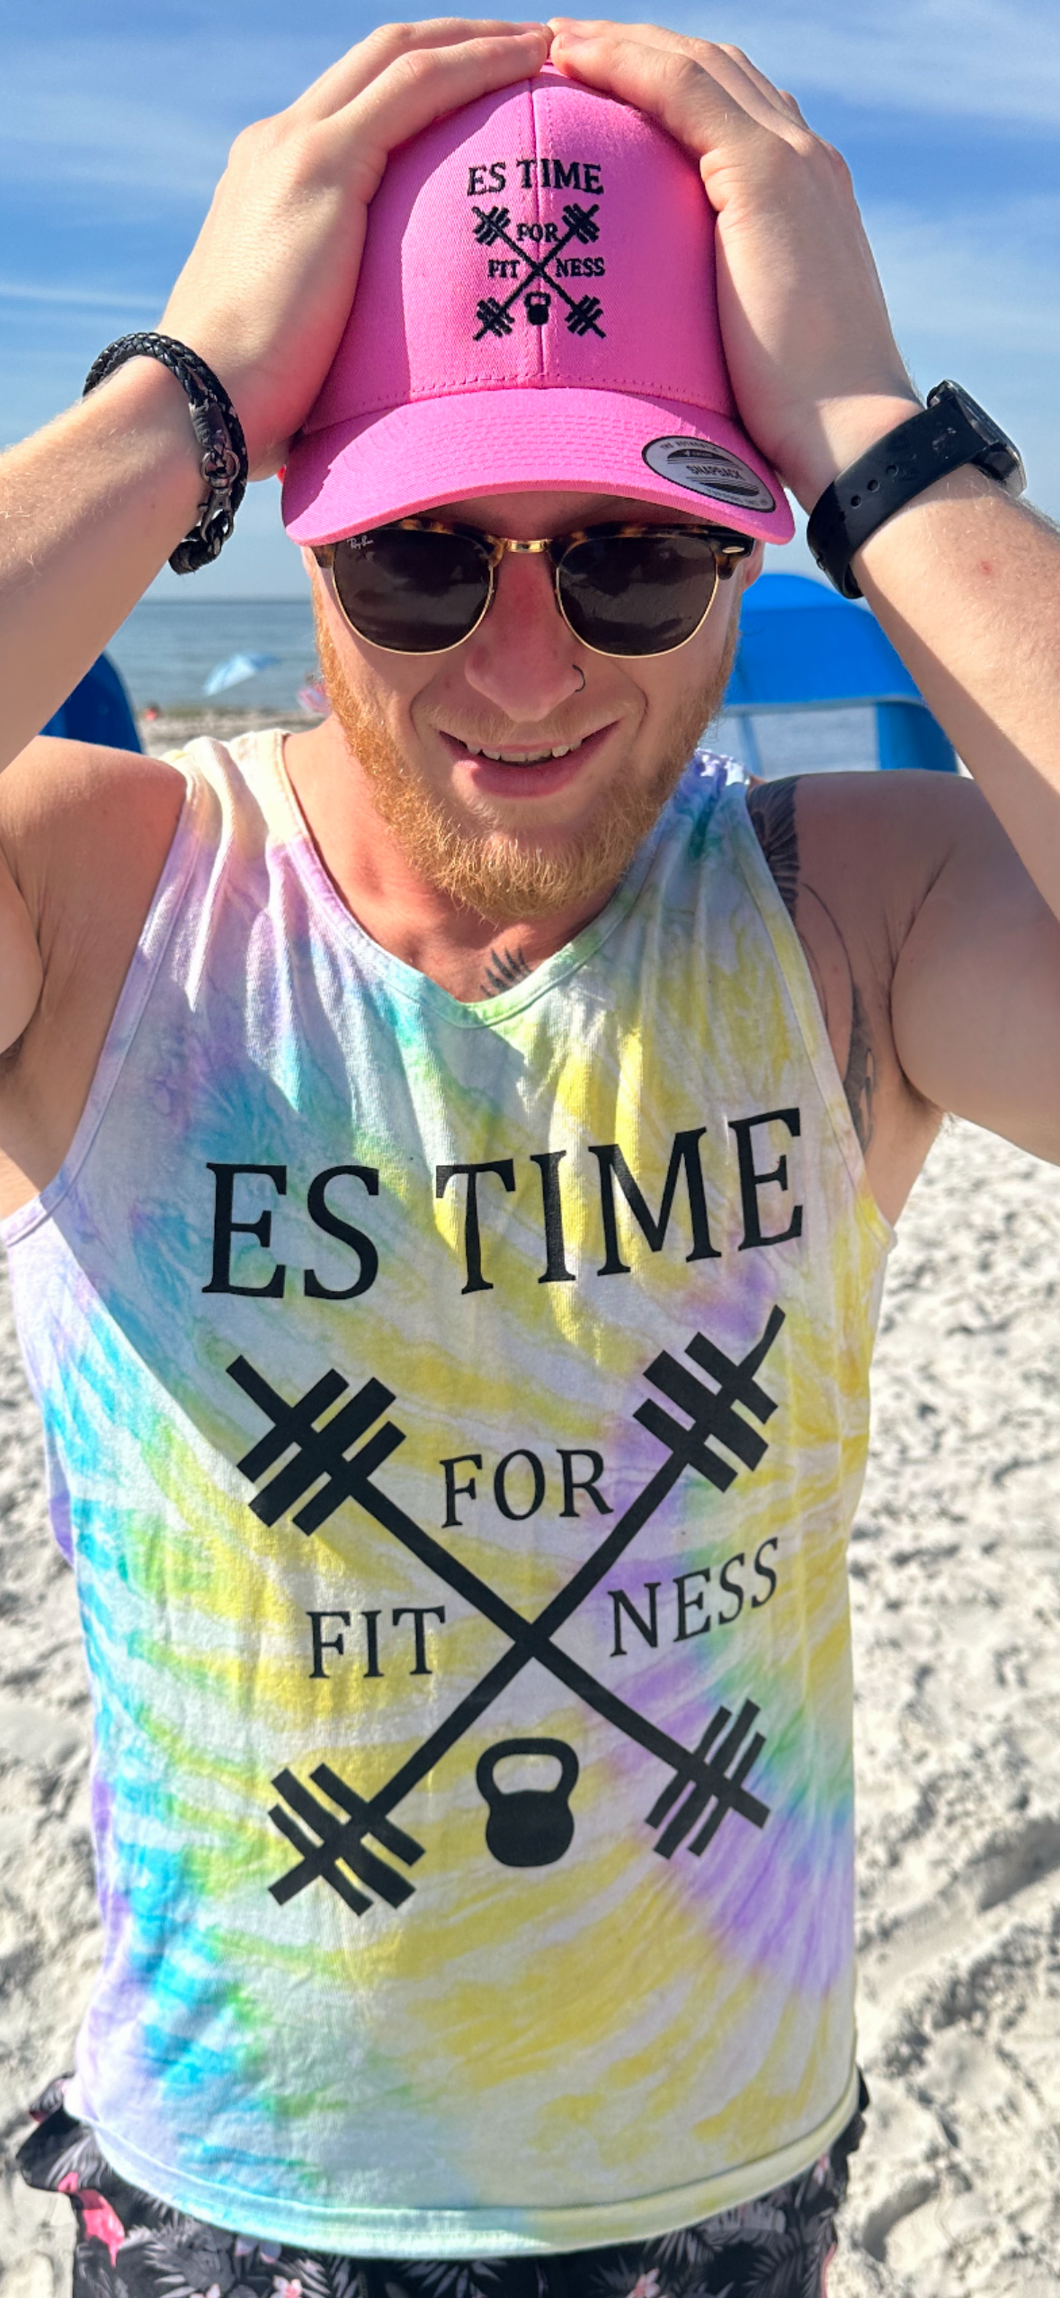 Flying Makes Fitness Fun Tank Top